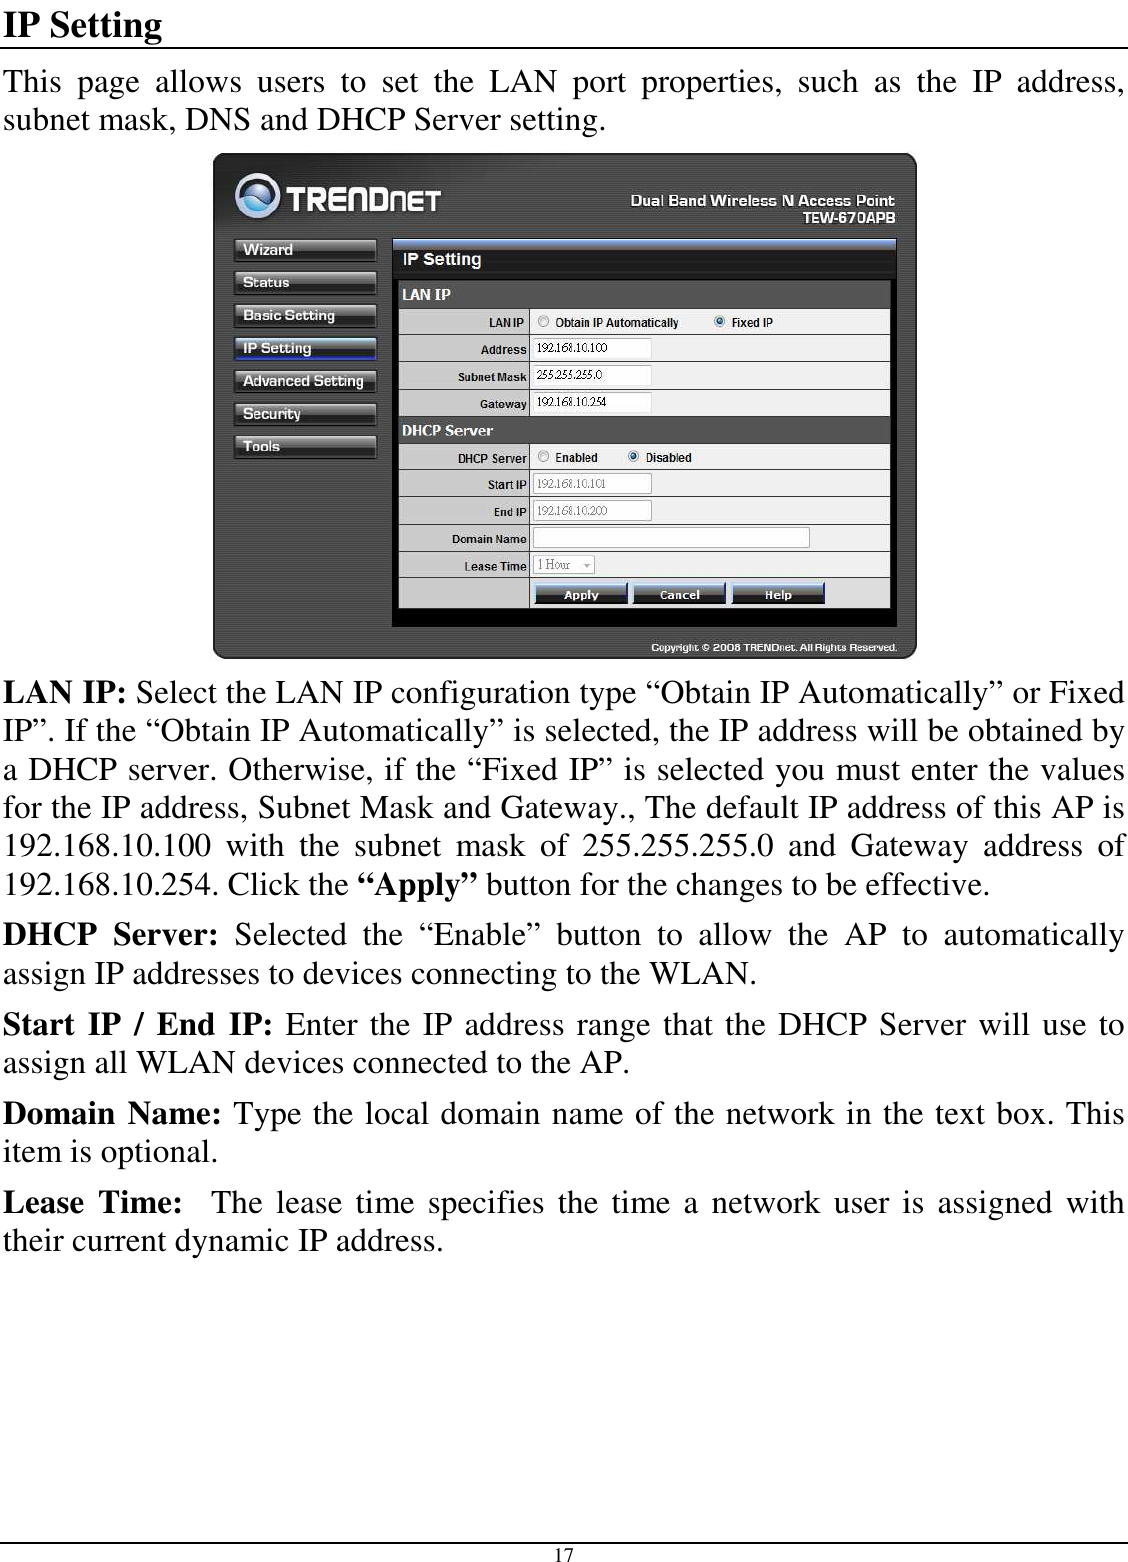  17 IP Setting This  page  allows  users  to  set  the  LAN  port  properties,  such  as  the  IP  address, subnet mask, DNS and DHCP Server setting.  LAN IP: Select the LAN IP configuration type “Obtain IP Automatically” or Fixed IP”. If the “Obtain IP Automatically” is selected, the IP address will be obtained by a DHCP server. Otherwise, if the “Fixed IP” is selected you must enter the values for the IP address, Subnet Mask and Gateway., The default IP address of this AP is 192.168.10.100  with  the  subnet  mask  of  255.255.255.0  and  Gateway  address  of 192.168.10.254. Click the “Apply” button for the changes to be effective.  DHCP  Server:  Selected  the  “Enable”  button  to  allow  the  AP  to  automatically assign IP addresses to devices connecting to the WLAN. Start IP / End IP: Enter the IP address range that the DHCP Server will use to assign all WLAN devices connected to the AP. Domain Name: Type the local domain name of the network in the text box. This item is optional. Lease  Time:    The lease  time specifies the time a network  user is assigned with their current dynamic IP address. 